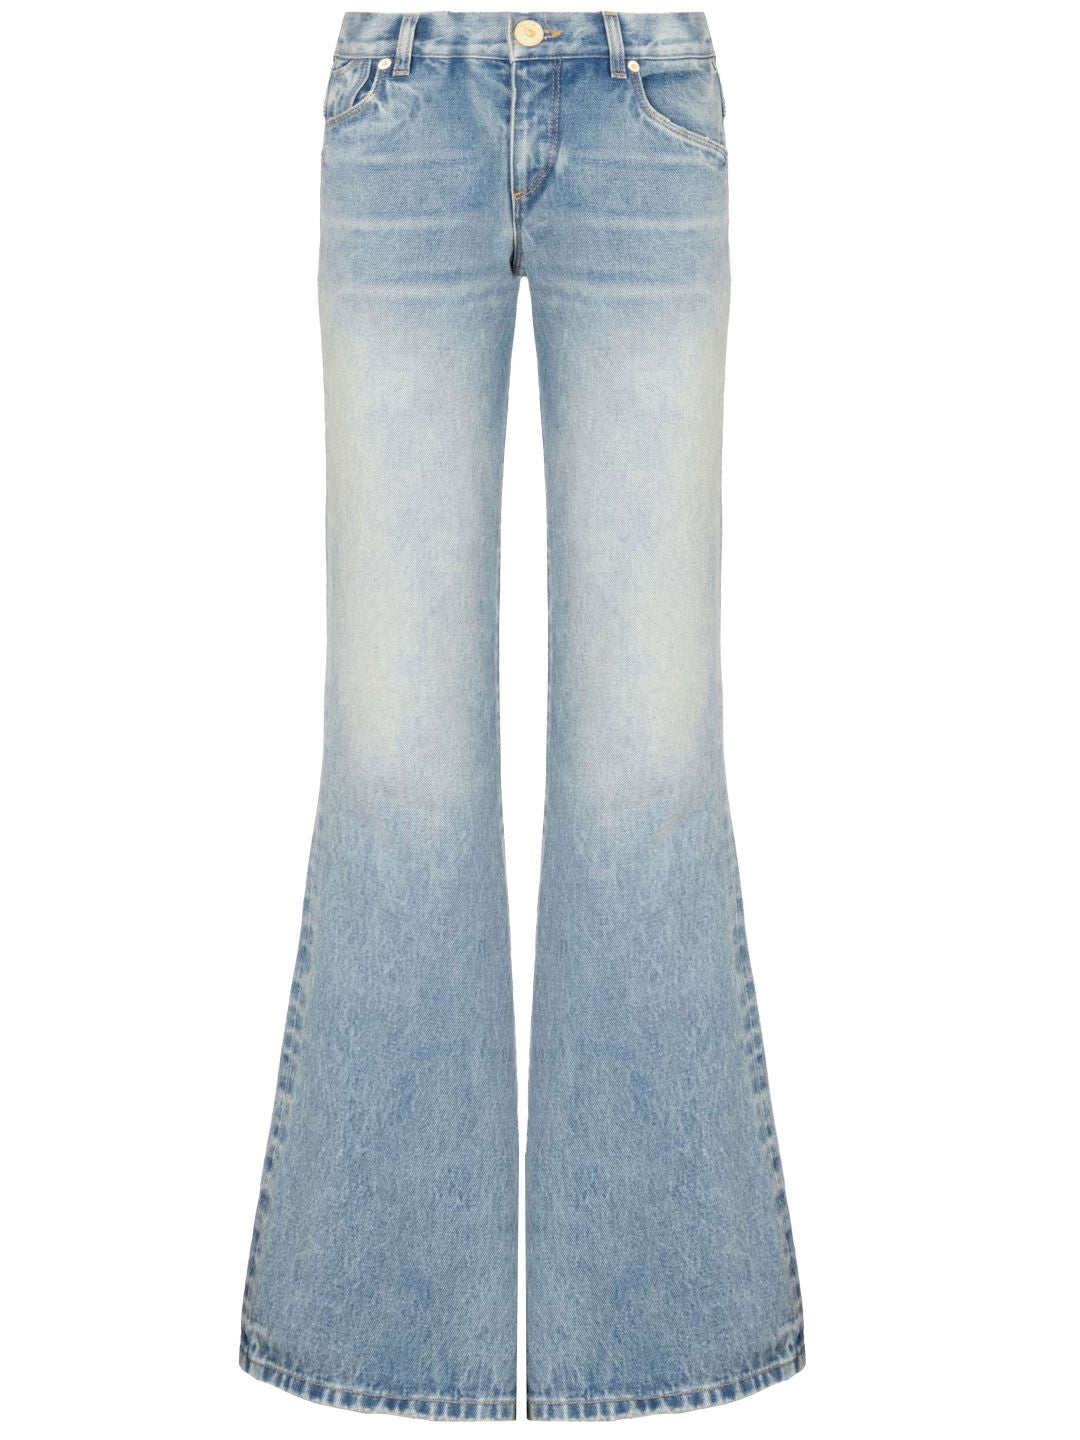 BALMAIN Fashionable LOW-WAIST WESTERN BOOTCUT Jeans in Vintage Washed-out Denim